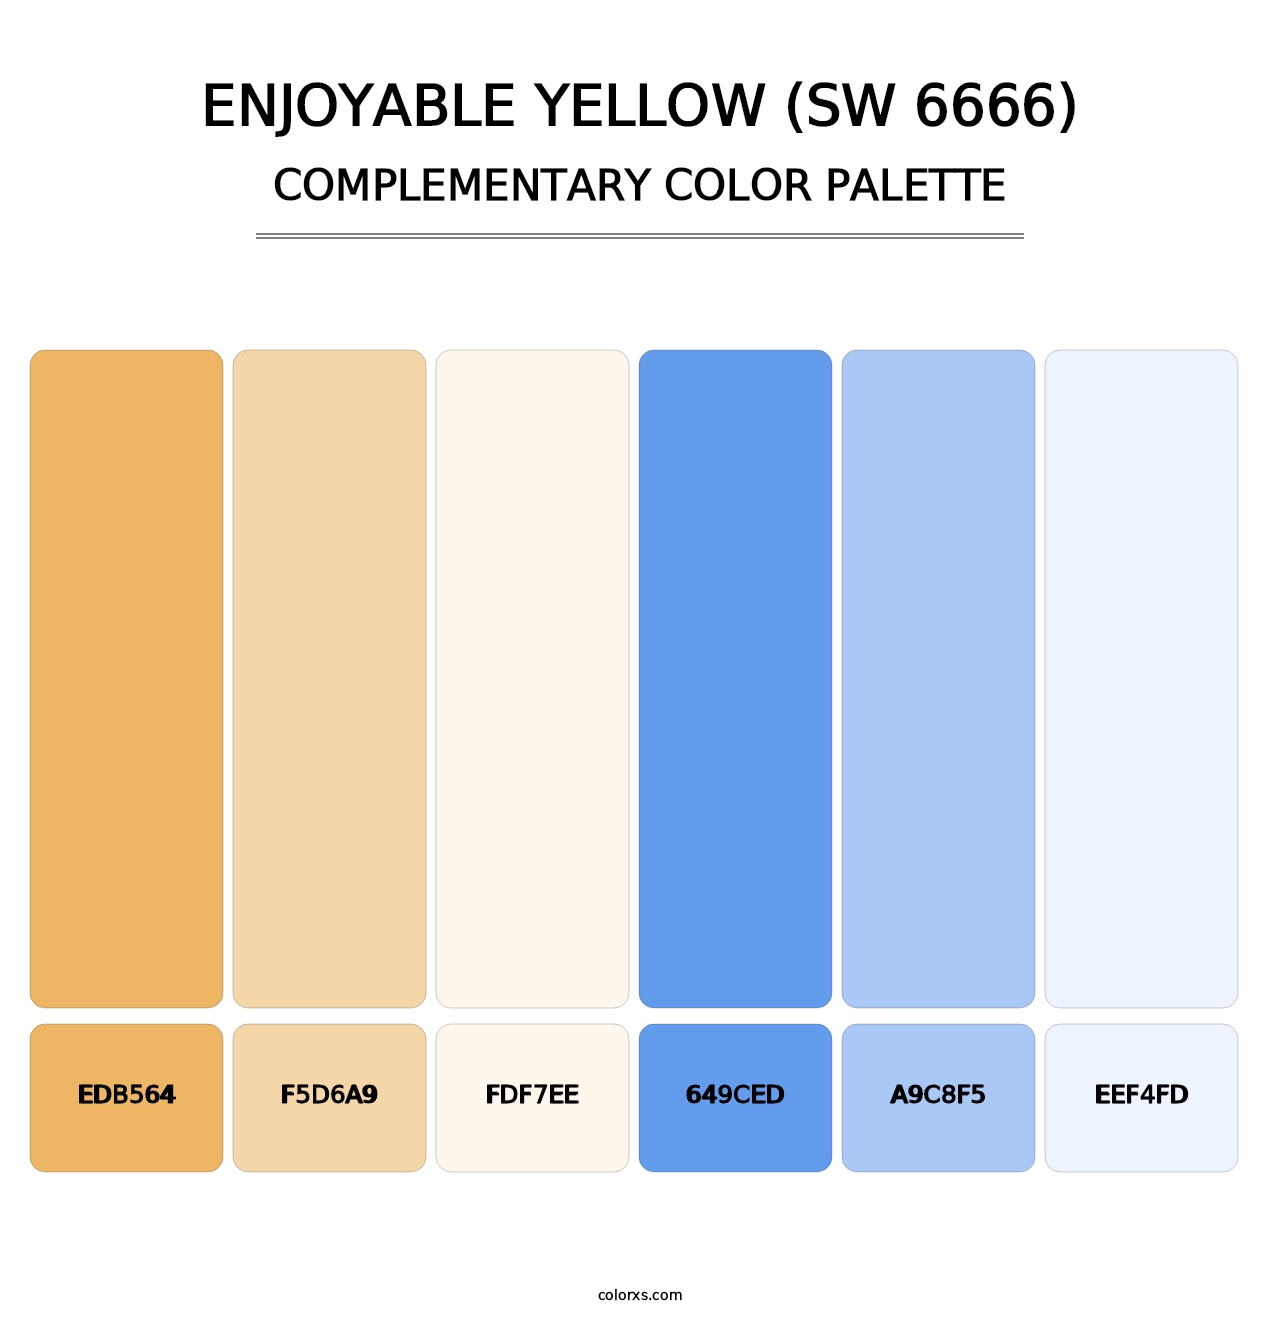 Enjoyable Yellow (SW 6666) - Complementary Color Palette